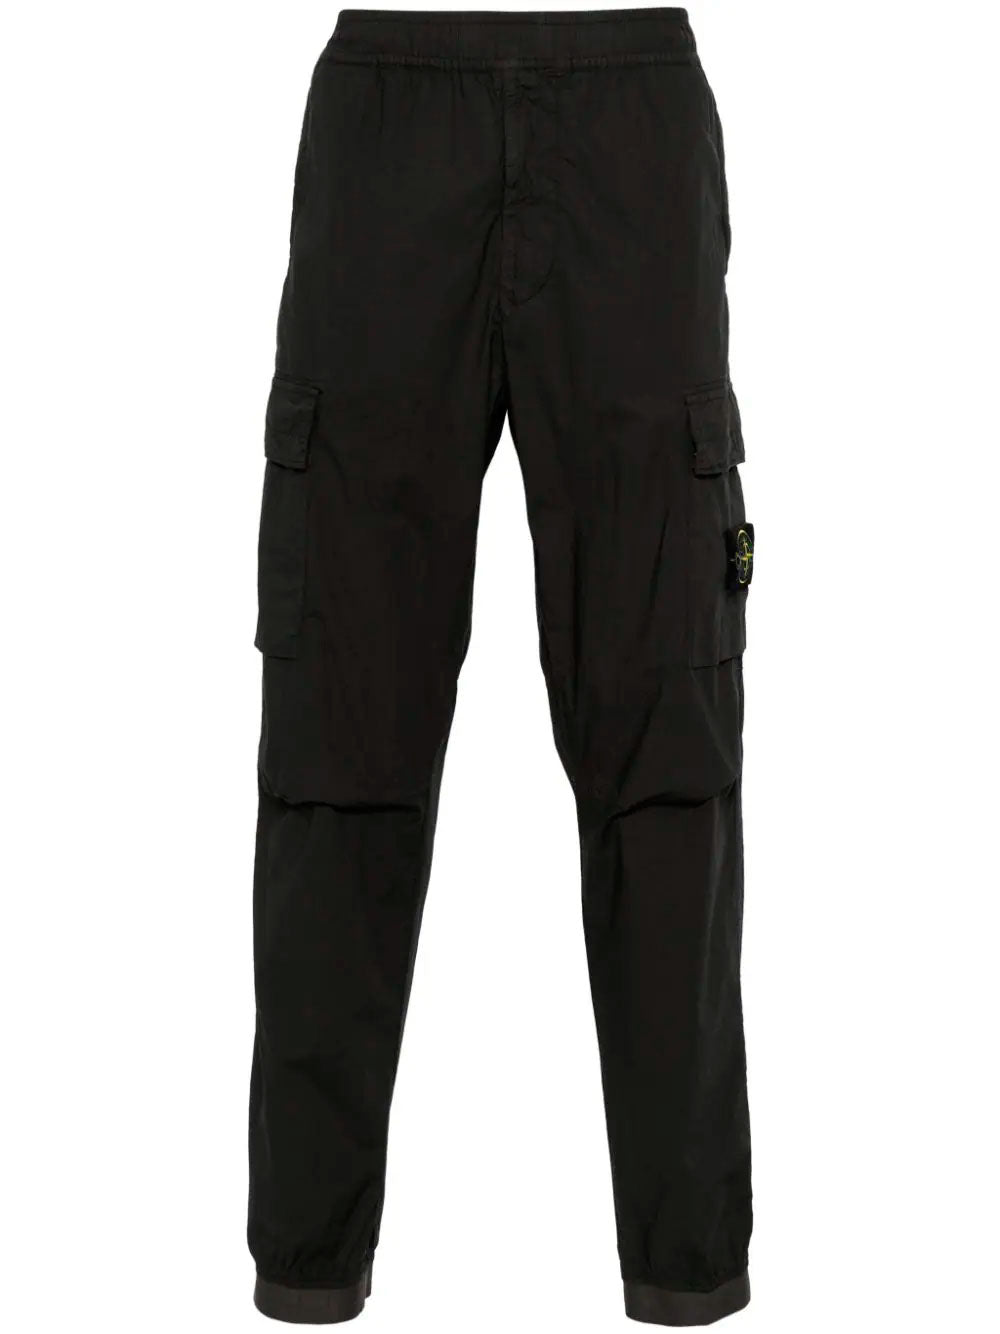 Compass-badge trousers